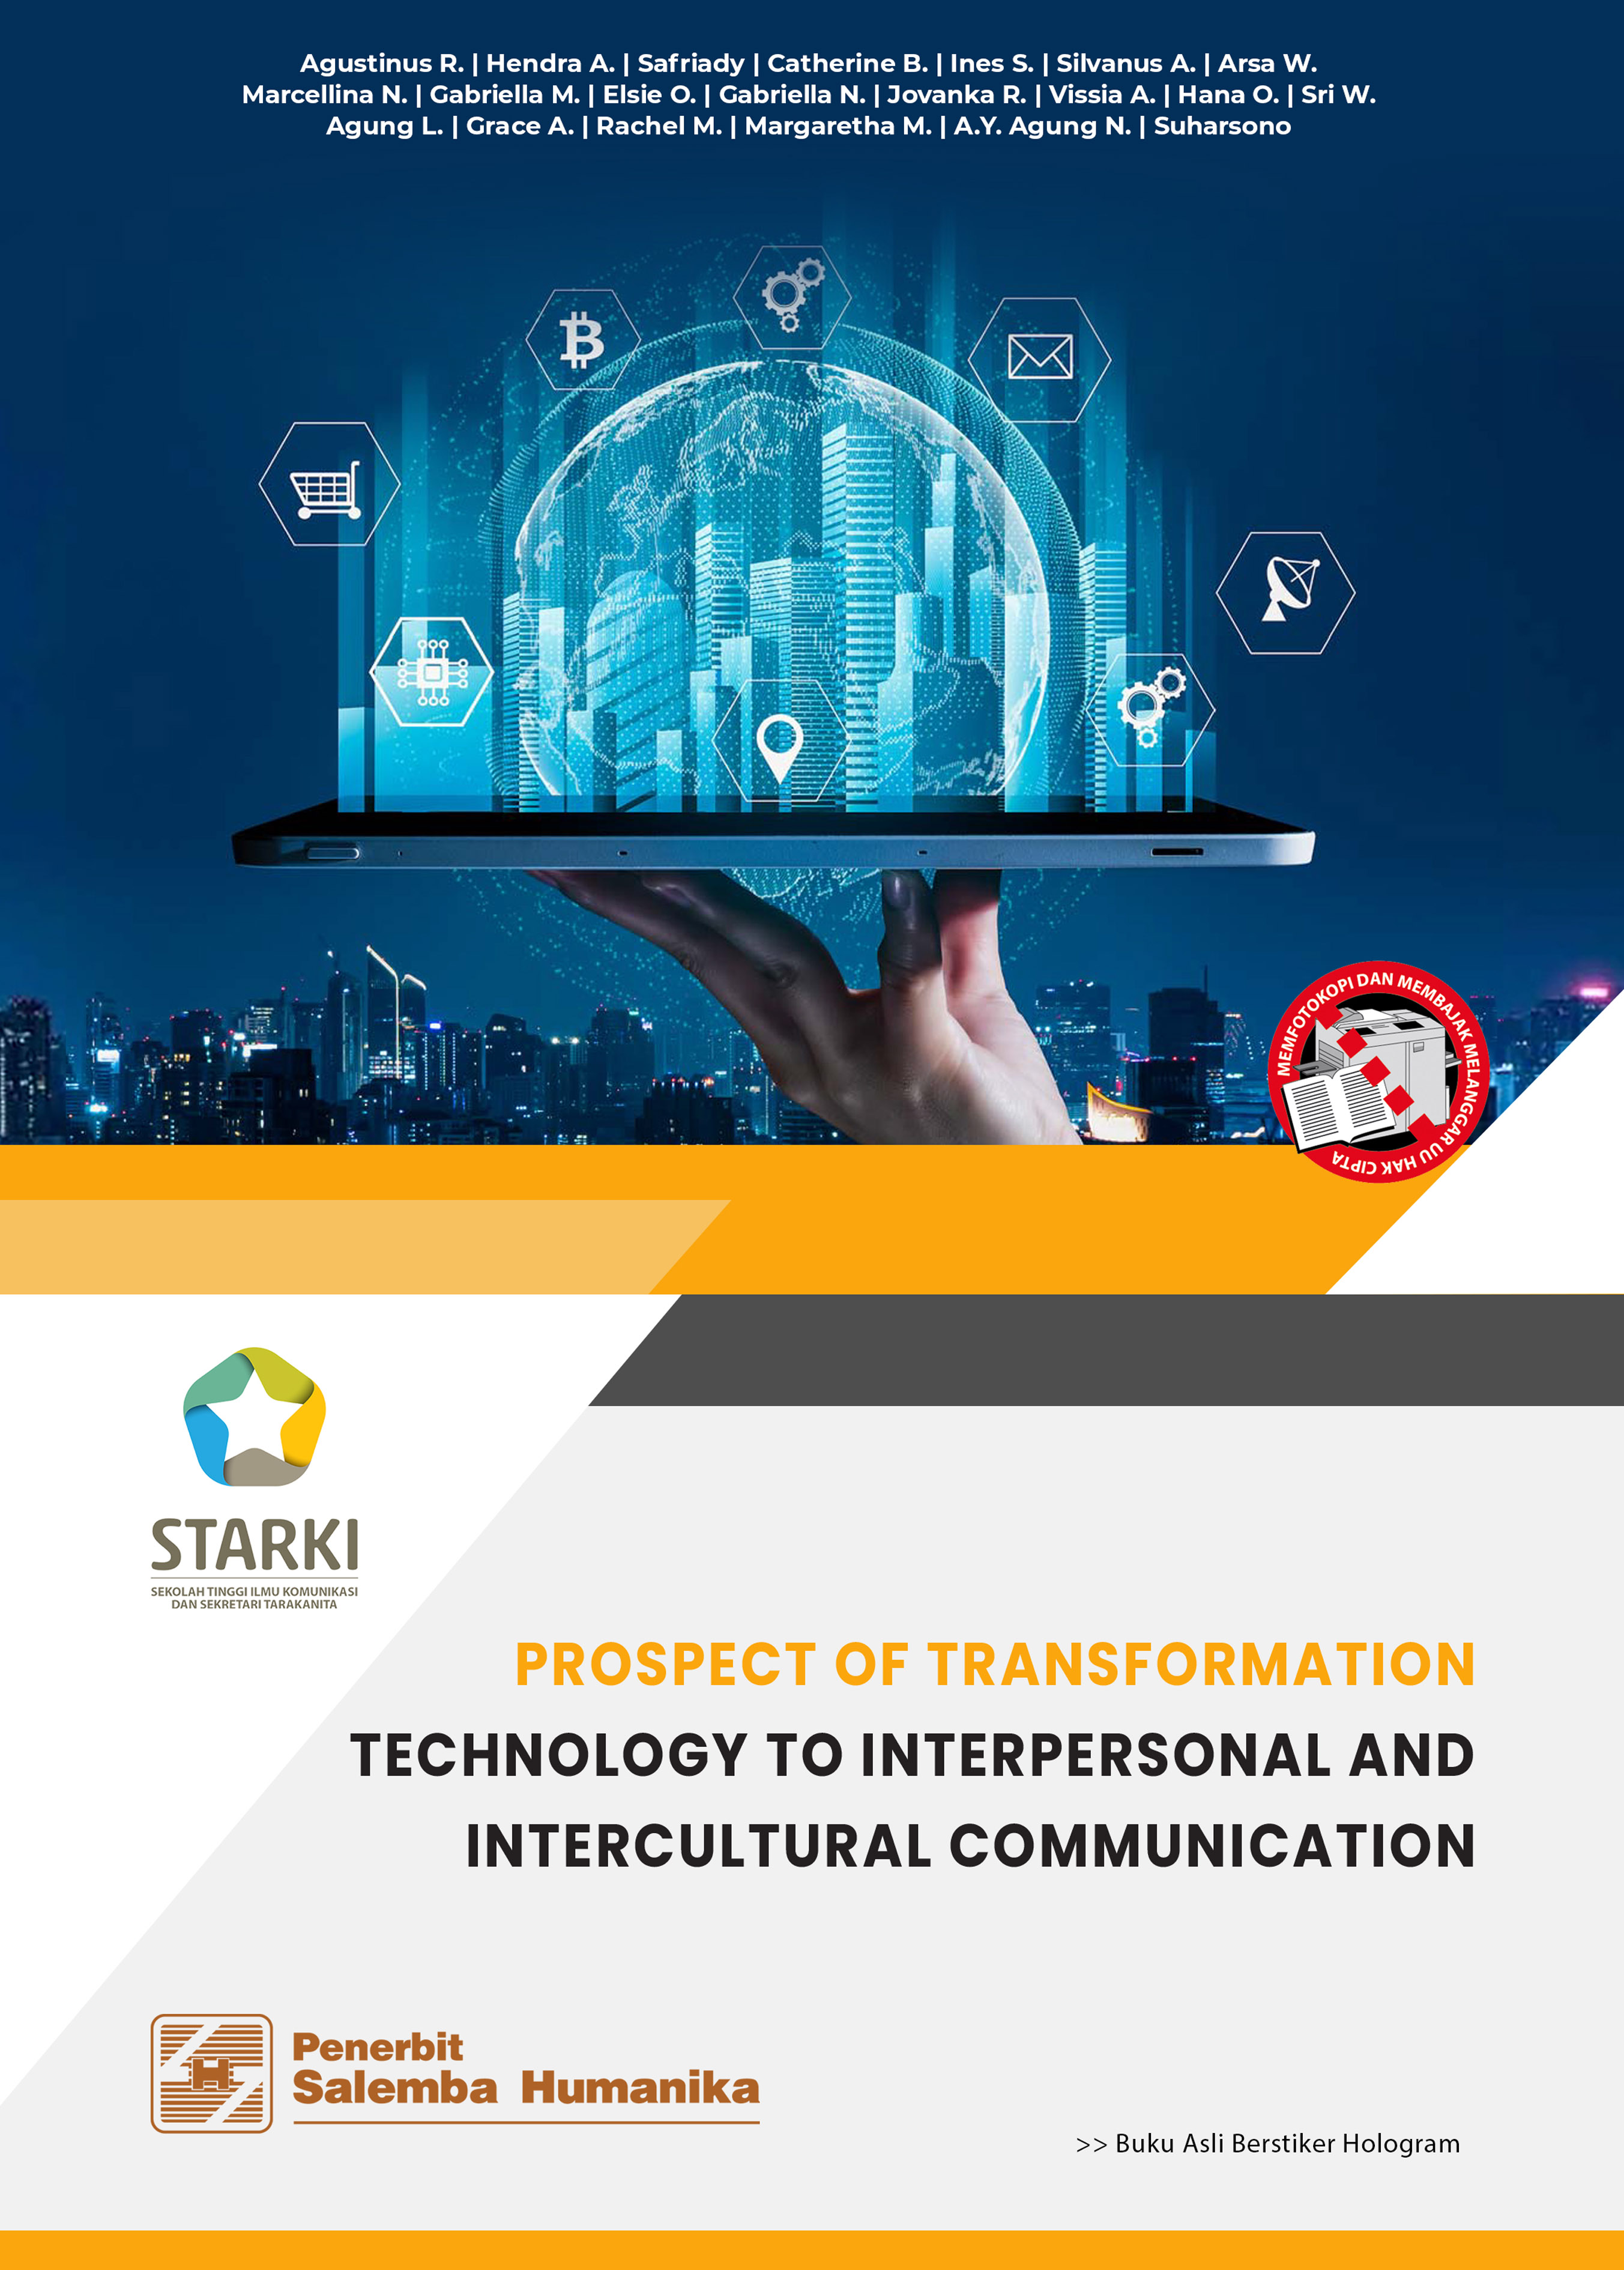 Prospect  of transformation technology to interpersonal and intercultural communication